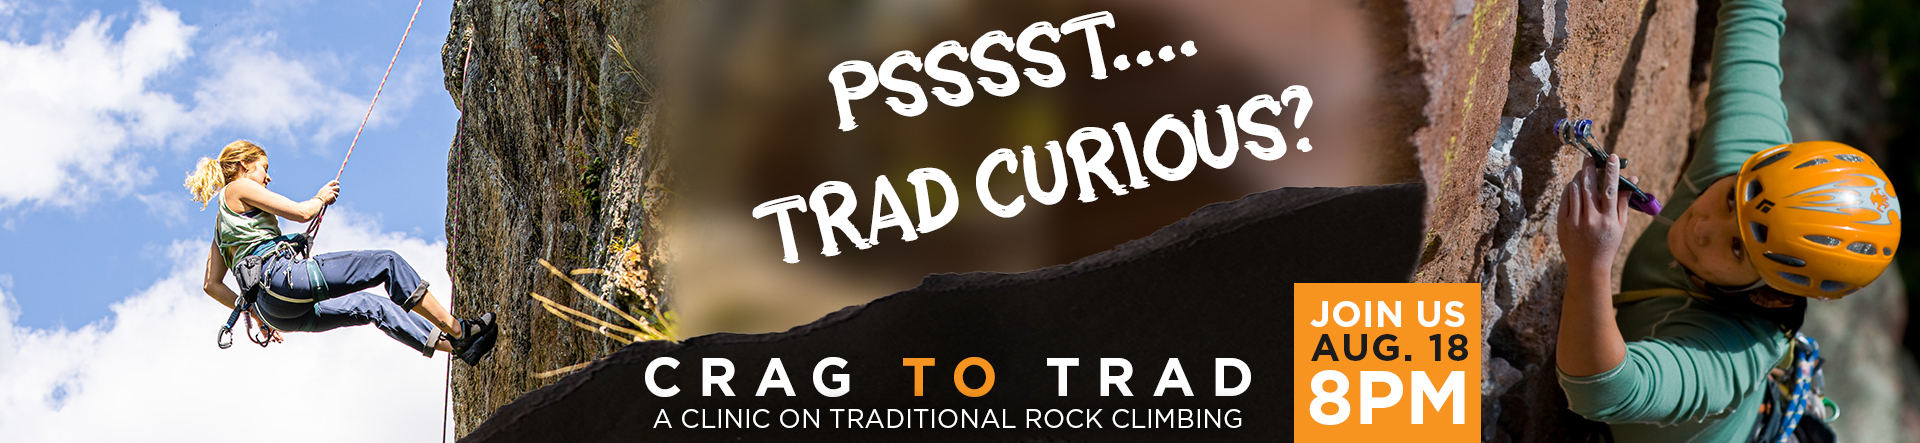 Crag to Trad Clinic